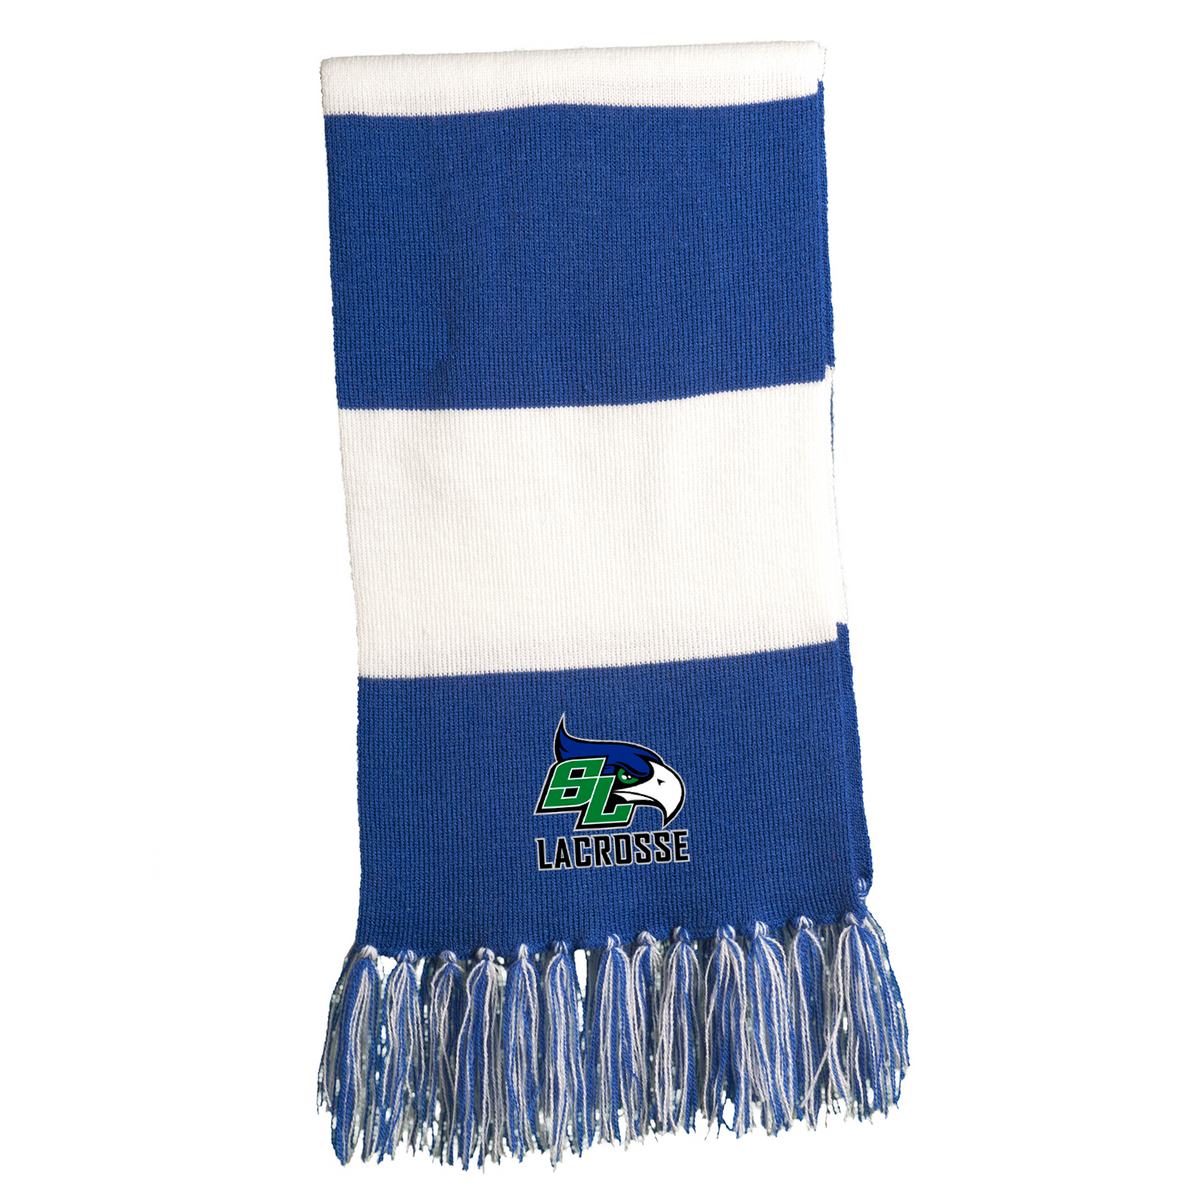 South Lakes Lacrosse Team Scarf